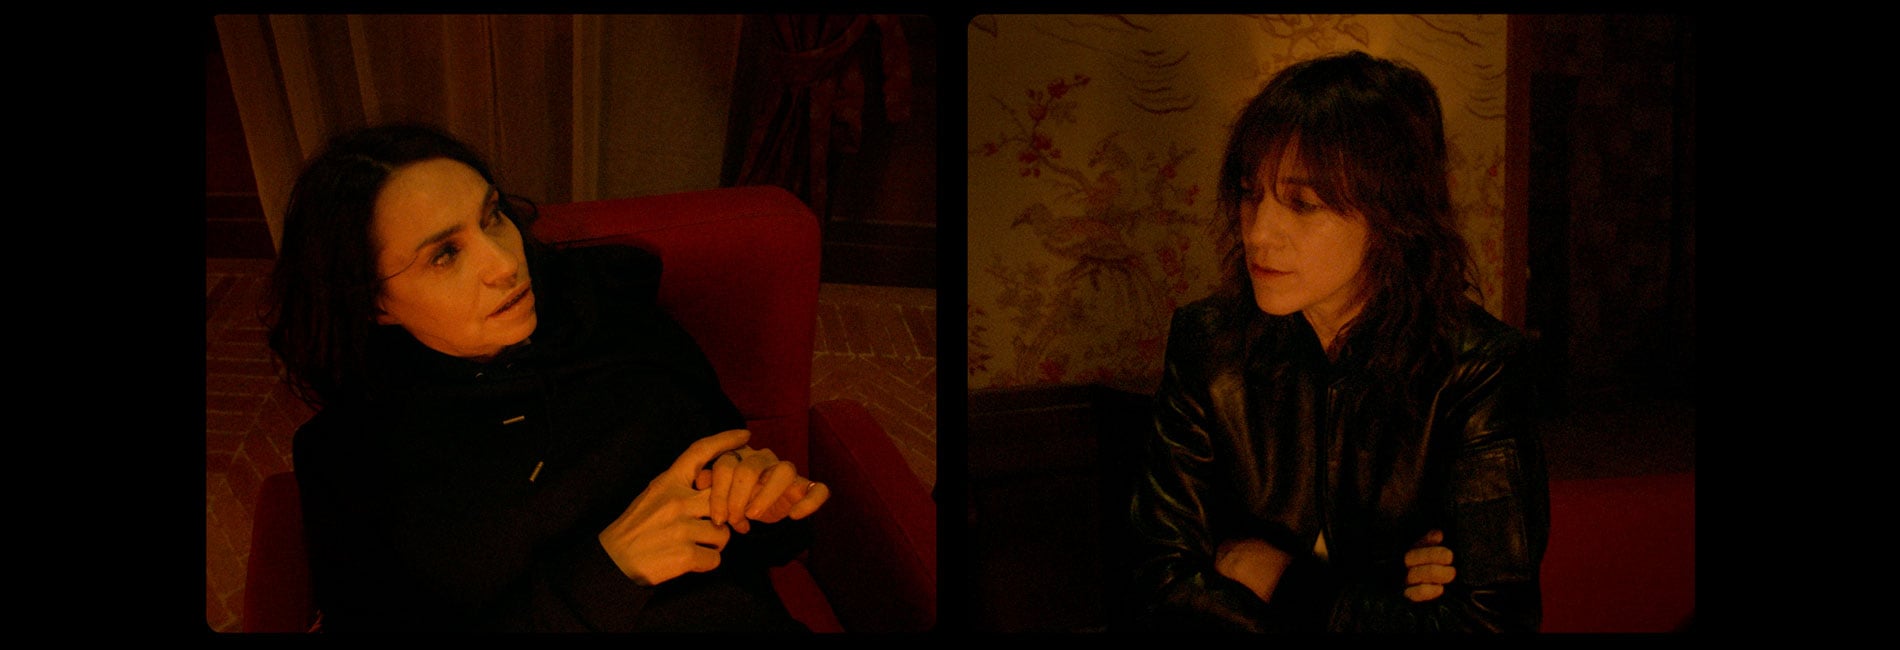 Béatrice Dalle and Charlotte Gainsbourg